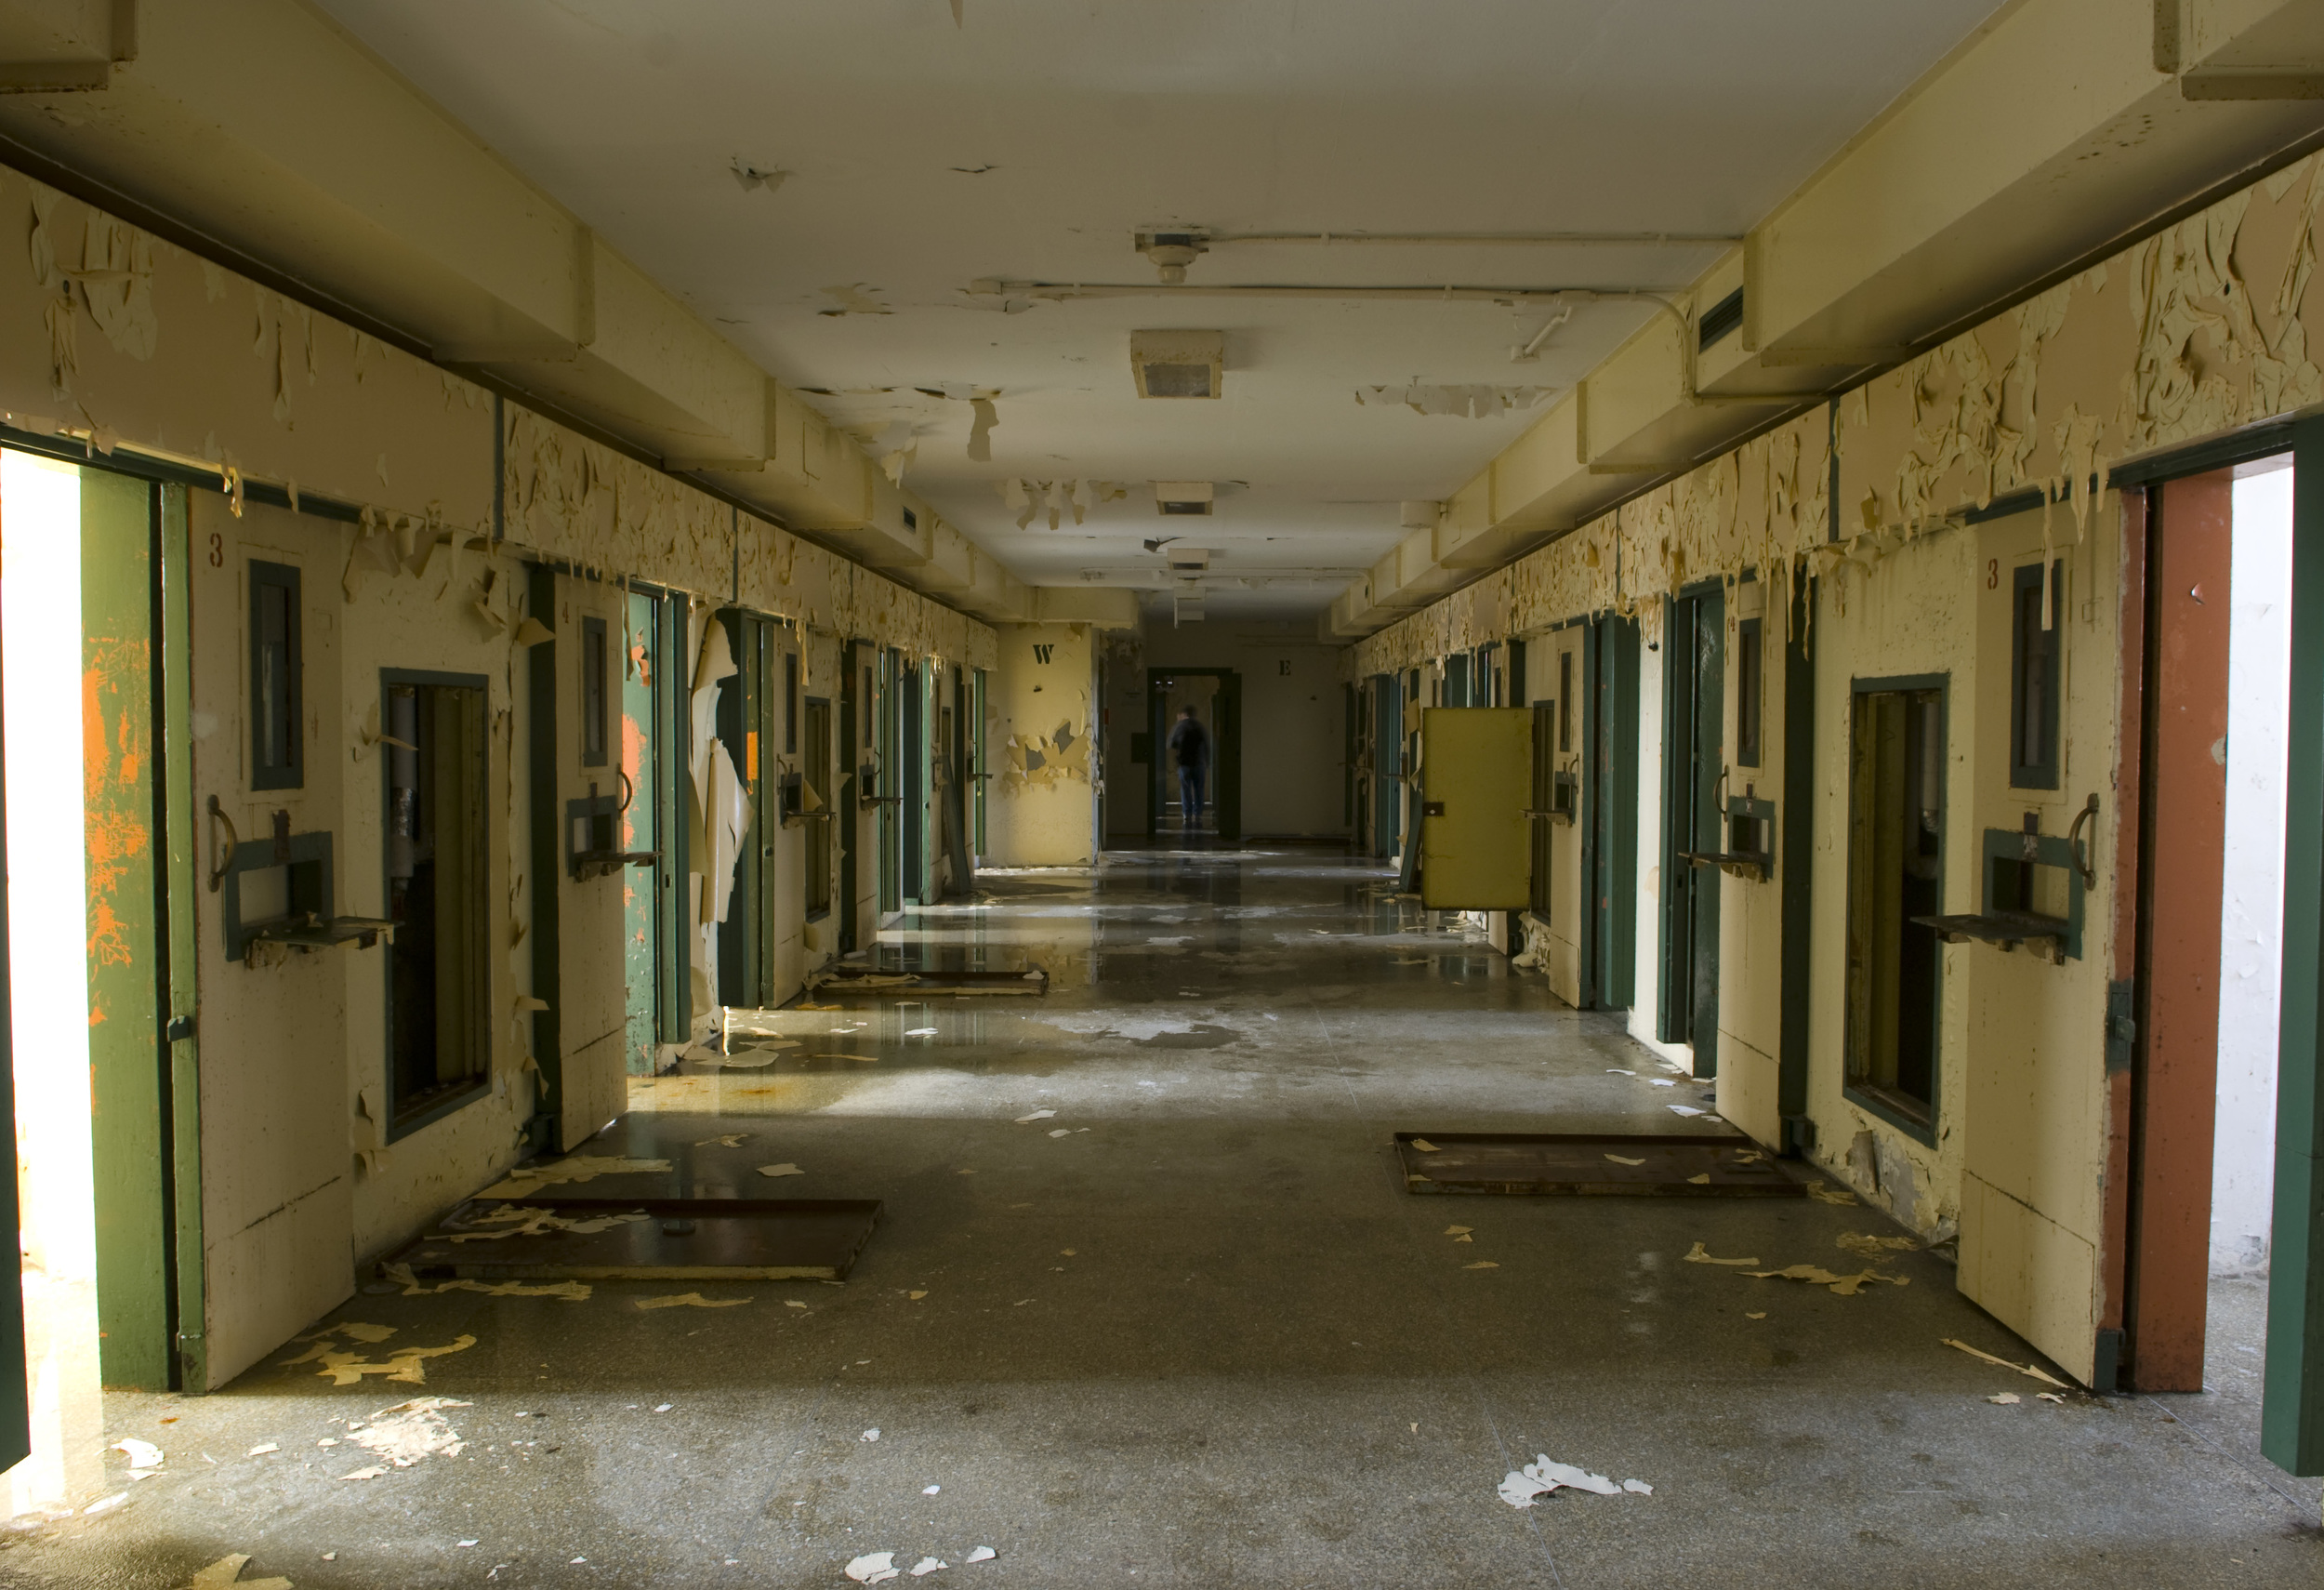  Solitary Confinement wing, Millbrook Prison / Millbrook, Ontario 